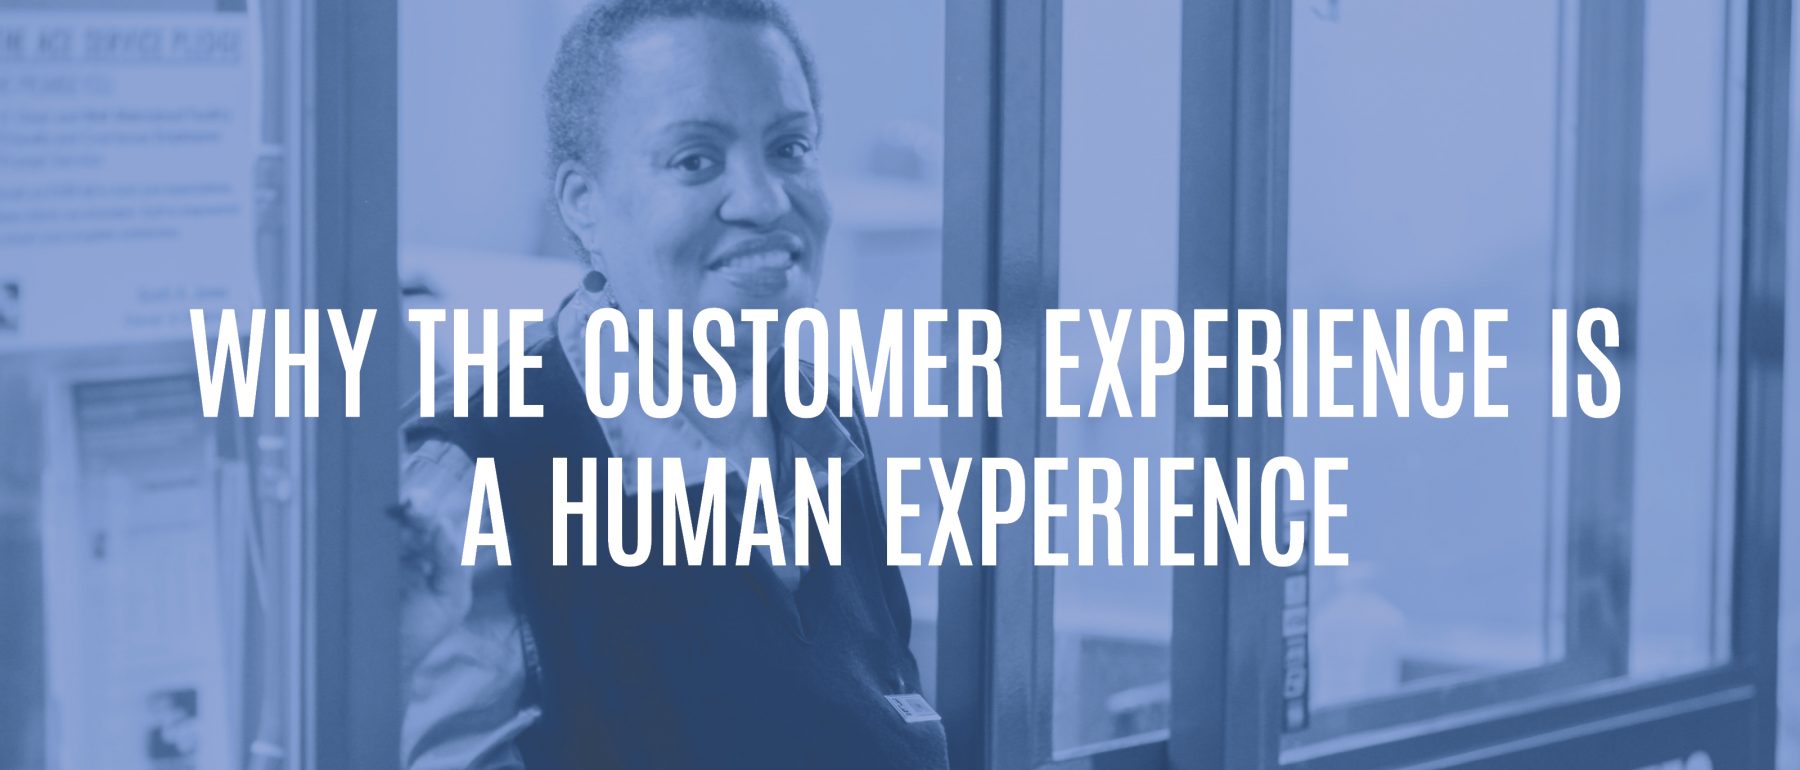 Blog Title - Why Customer Experience is a Human Experience